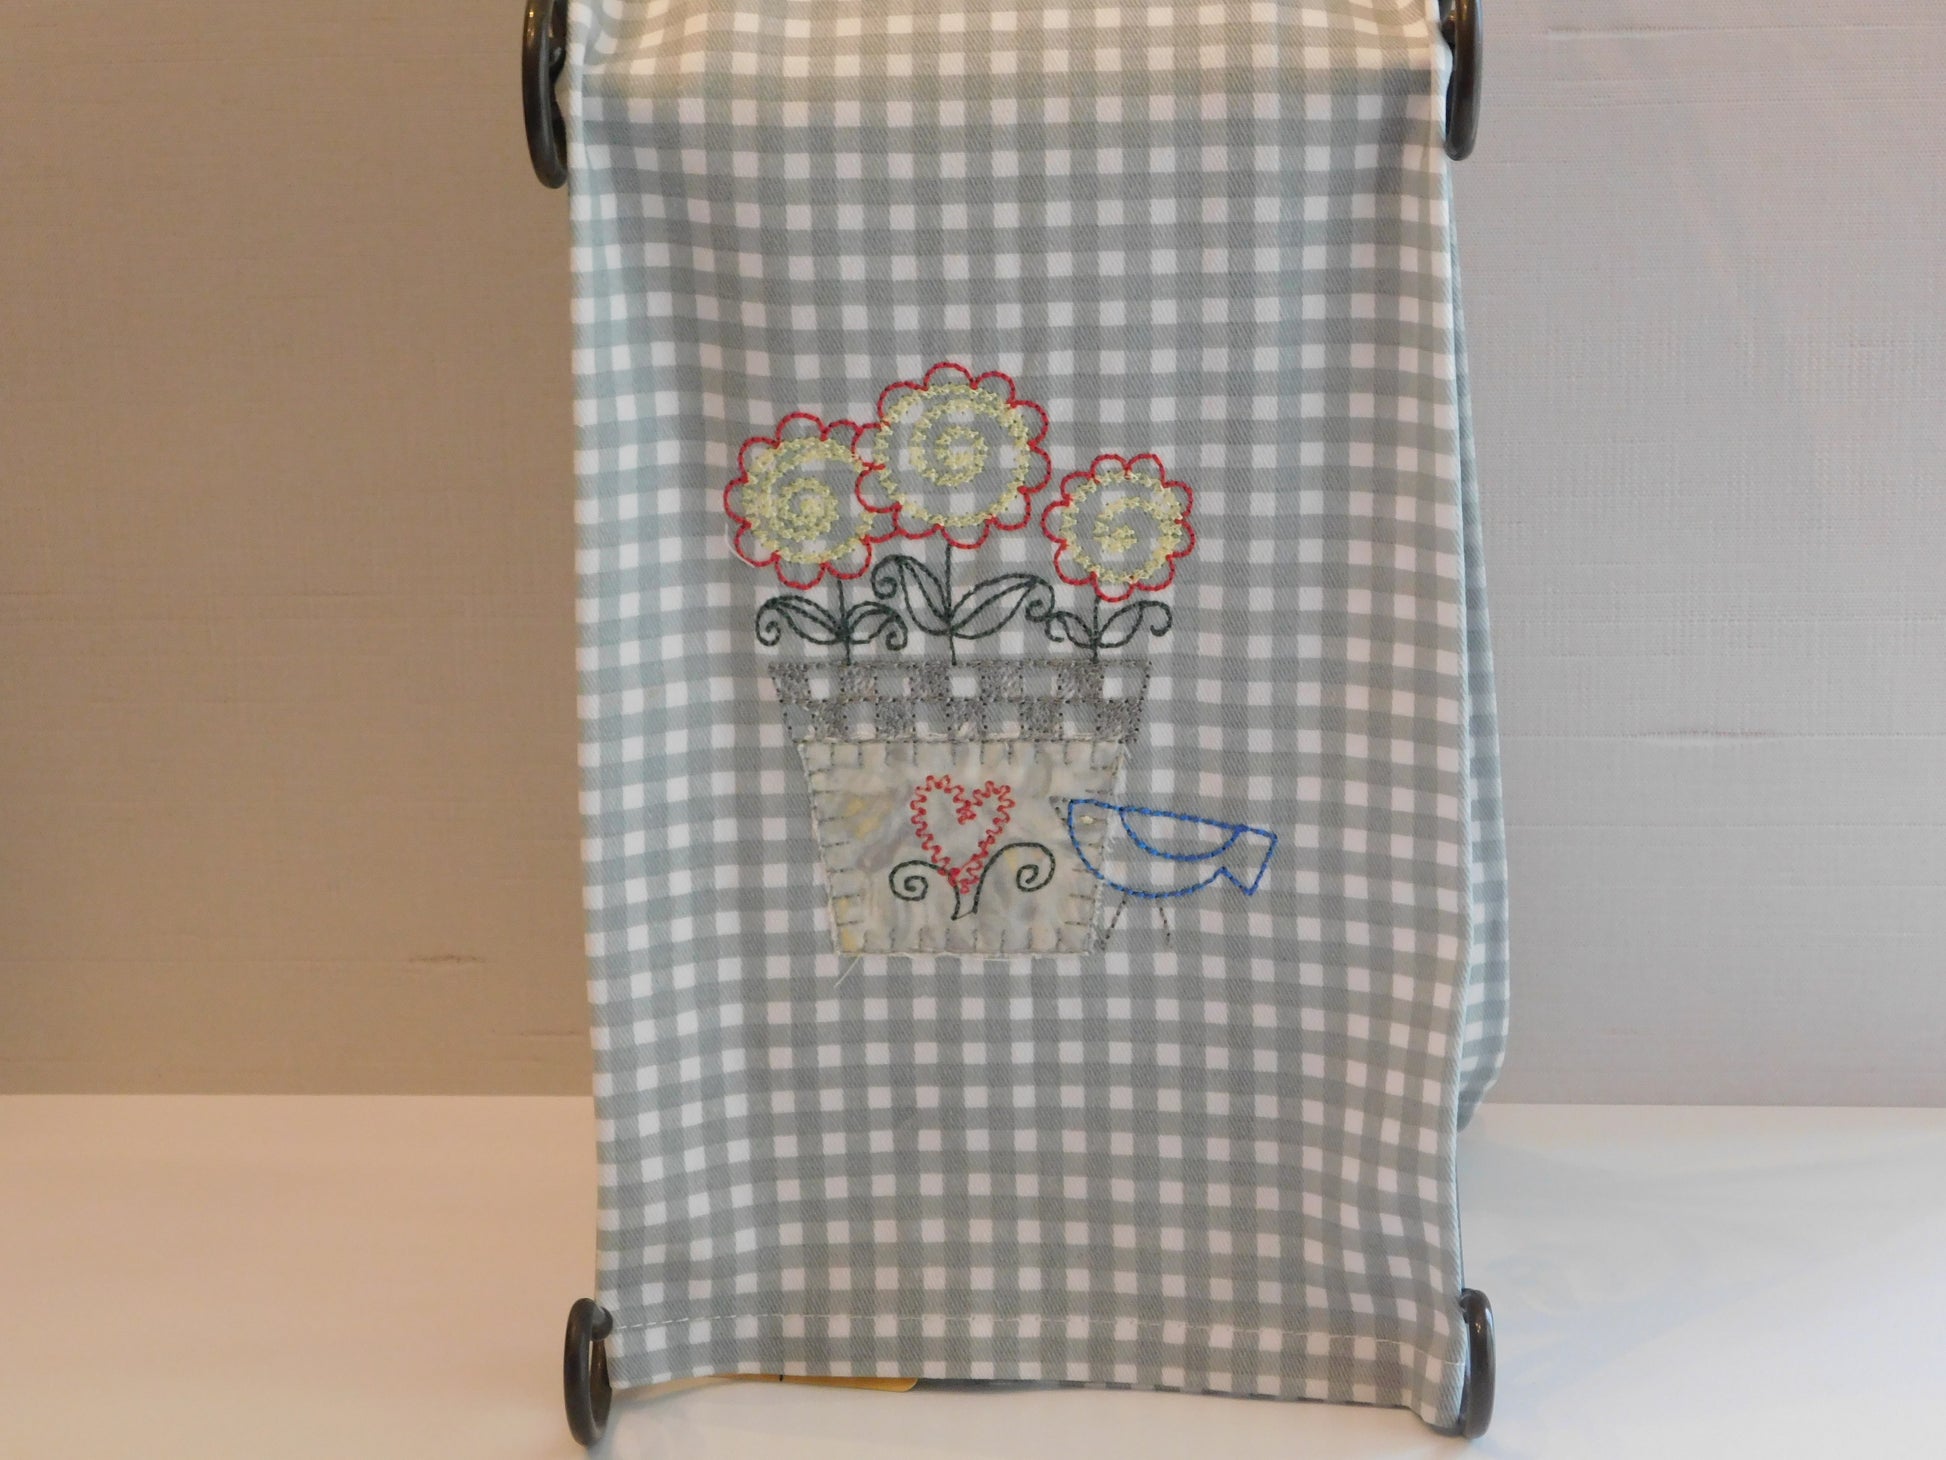 Embroidered Applique Kitchen Towel with Pot of 3- Flowers and Blue Bird